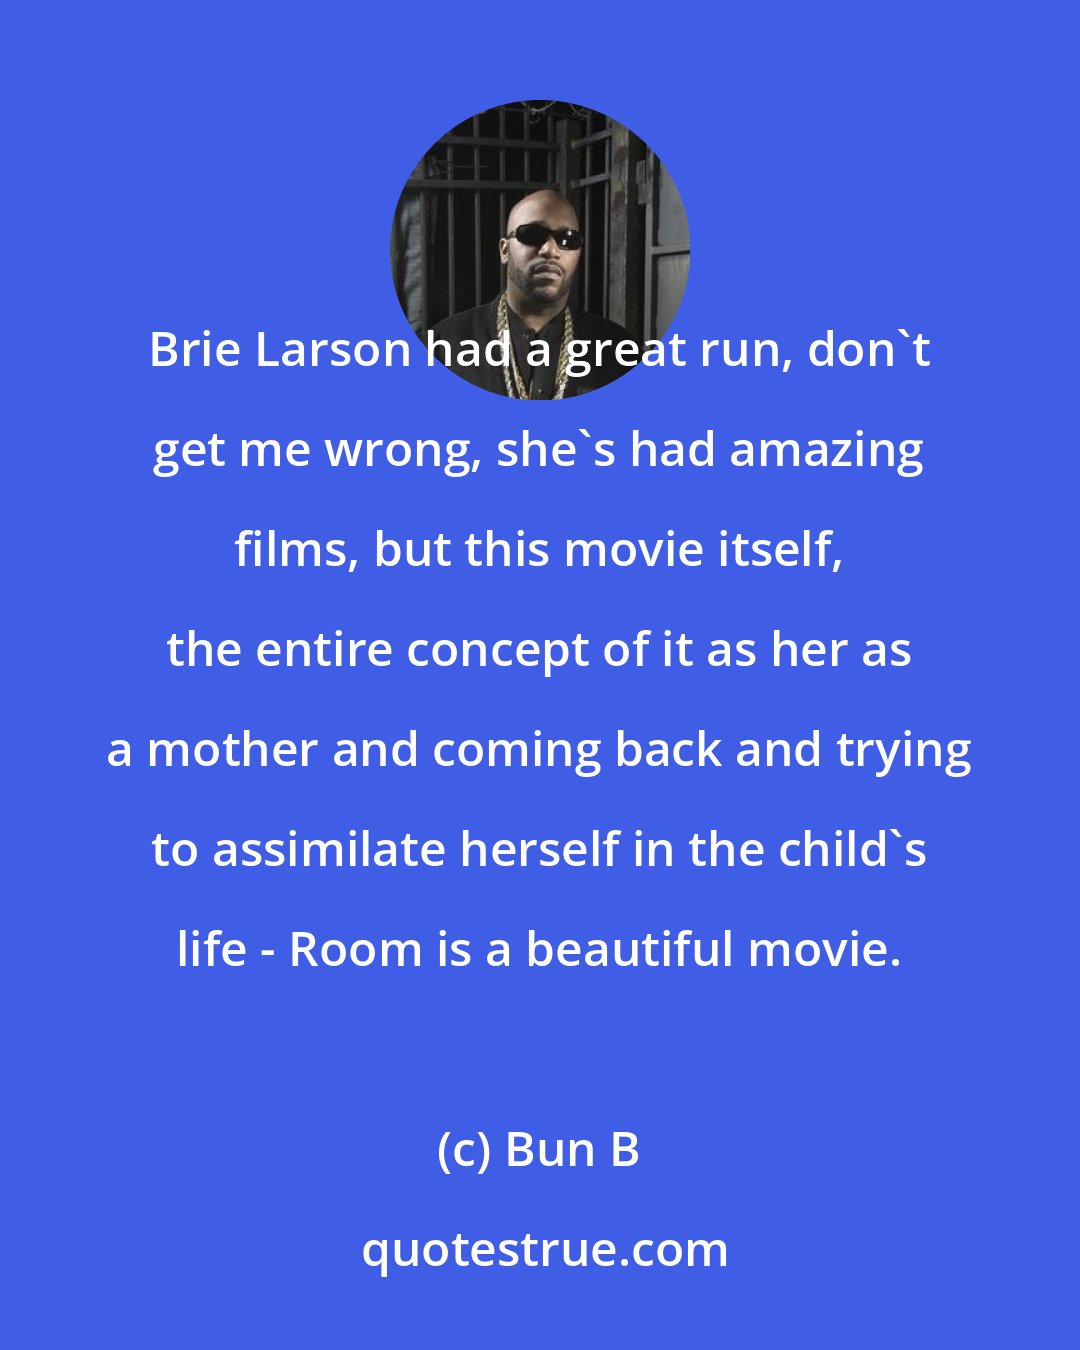 Bun B: Brie Larson had a great run, don't get me wrong, she's had amazing films, but this movie itself, the entire concept of it as her as a mother and coming back and trying to assimilate herself in the child's life - Room is a beautiful movie.